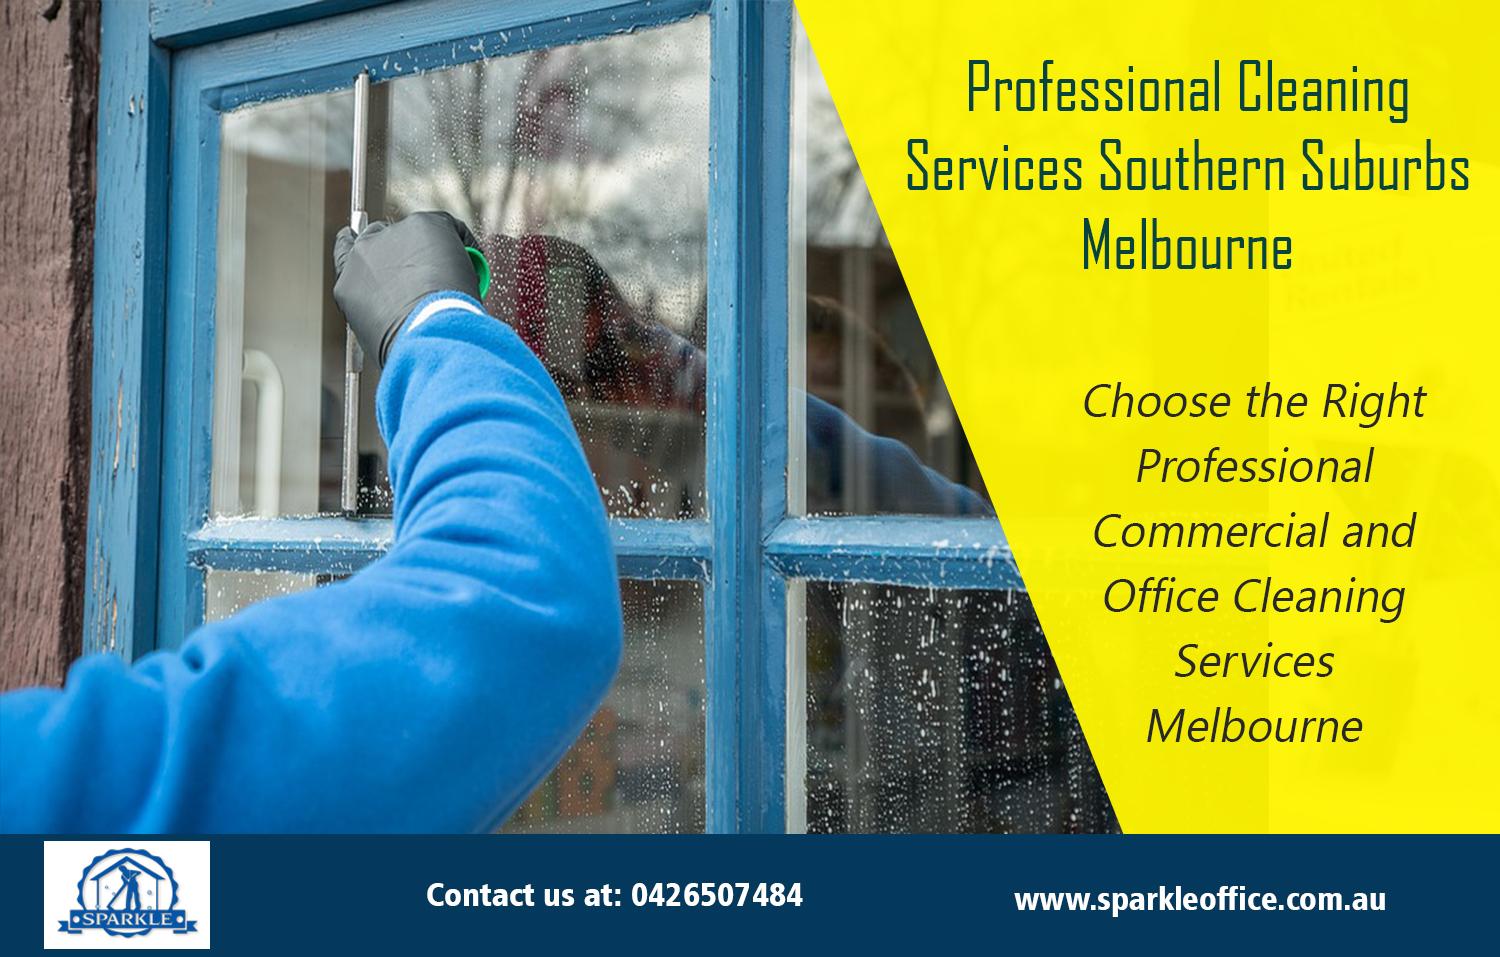 Professional Cleaning Services southern suburbs Melbourne